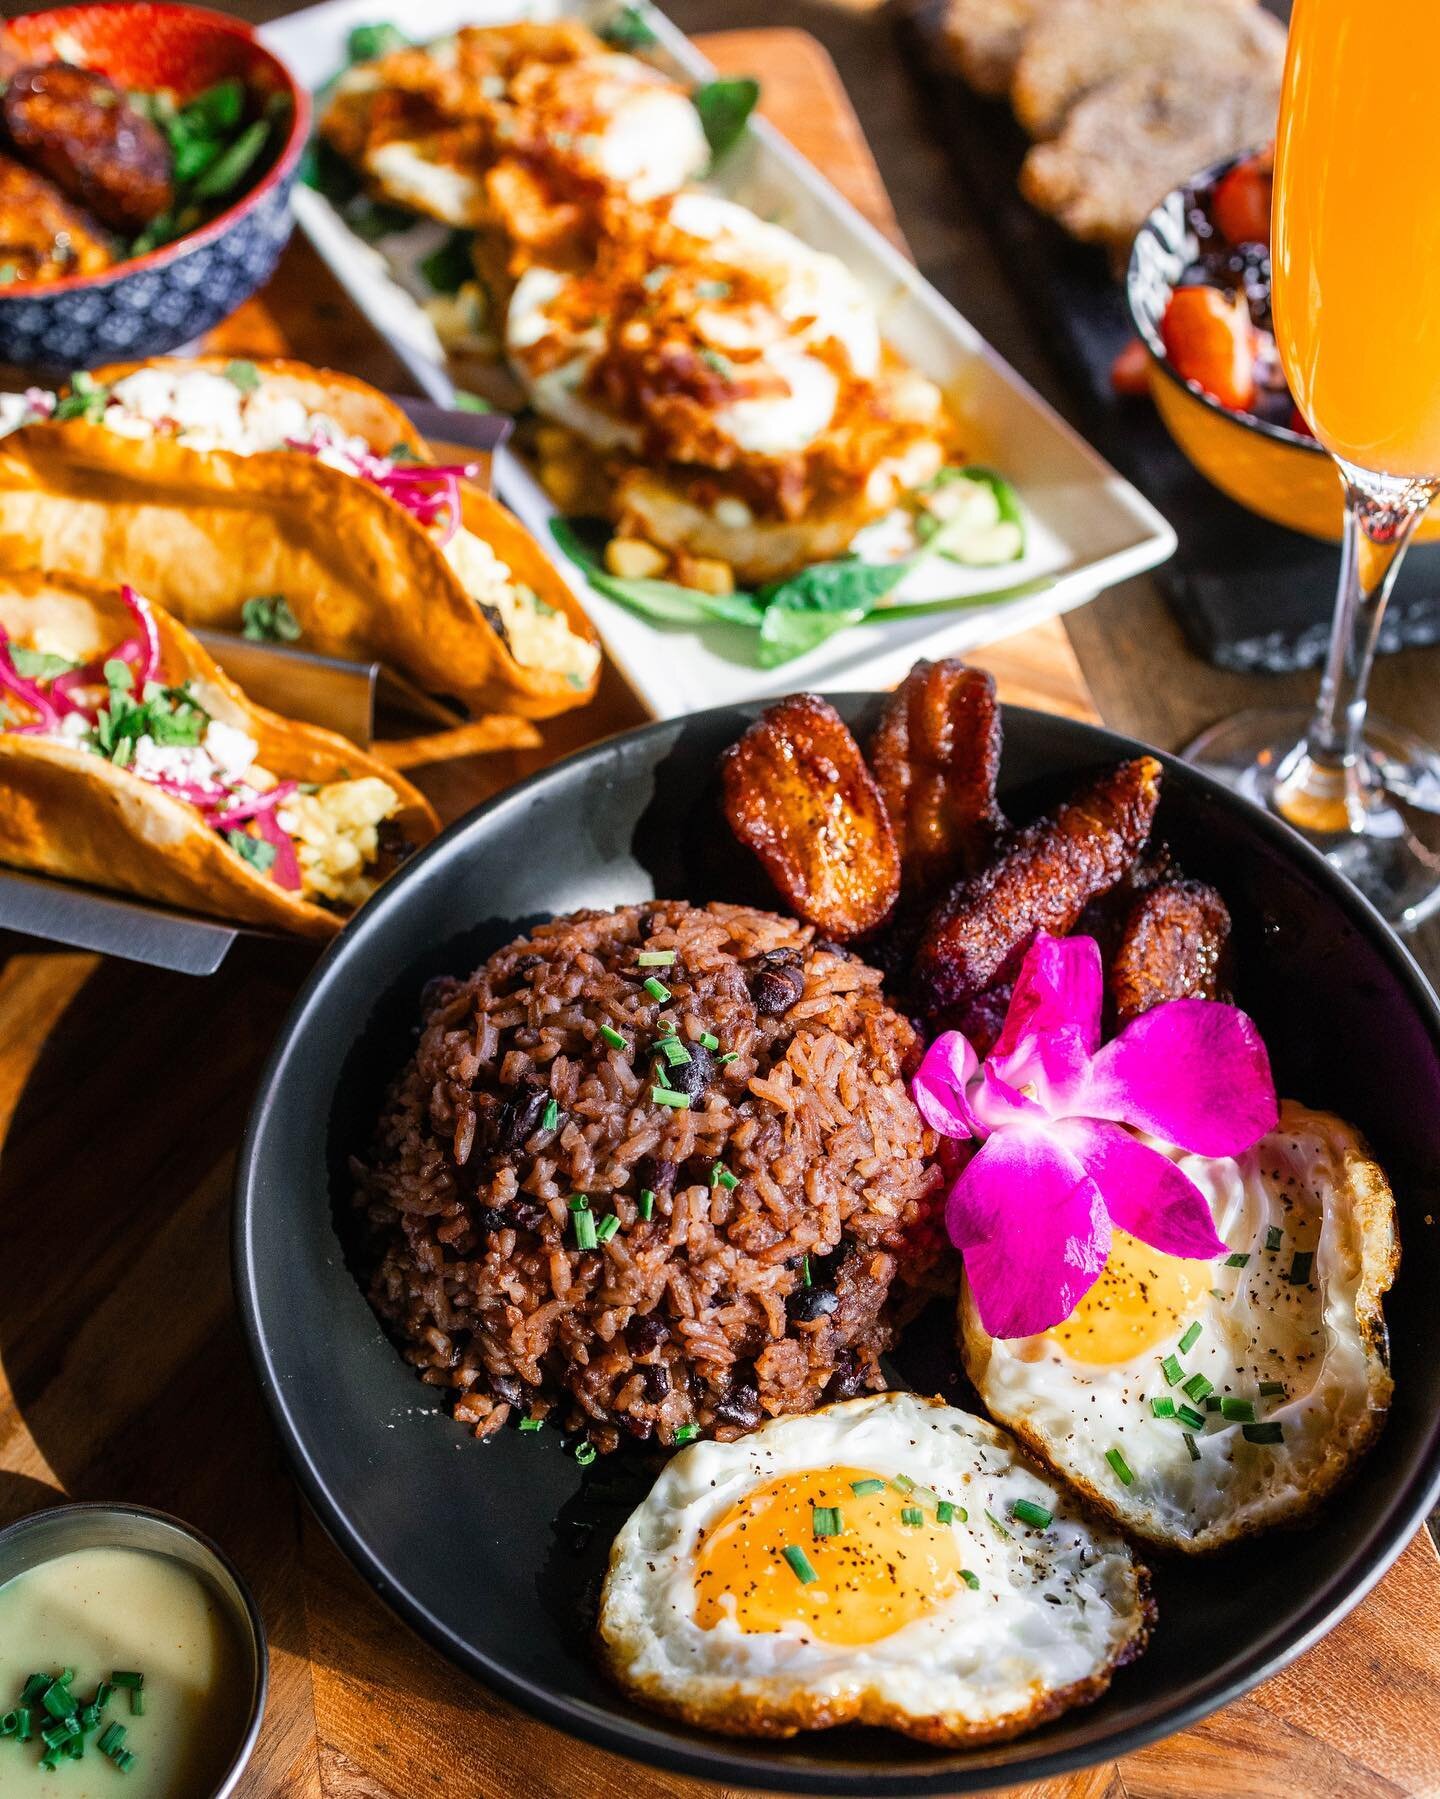 BRUNCH RETURNS 🍳
Mark Your Calendars!
Sunday Nov 19th 🥂 11am-3pm

You asked and we answered! 
Indulge in a COPA inspired Brunch Menu featuring new dishes like Tostones Benedict, Gallo Pinto, Breakfast Tacos, Steak &amp; Eggs and more! 

Plus enjoy 